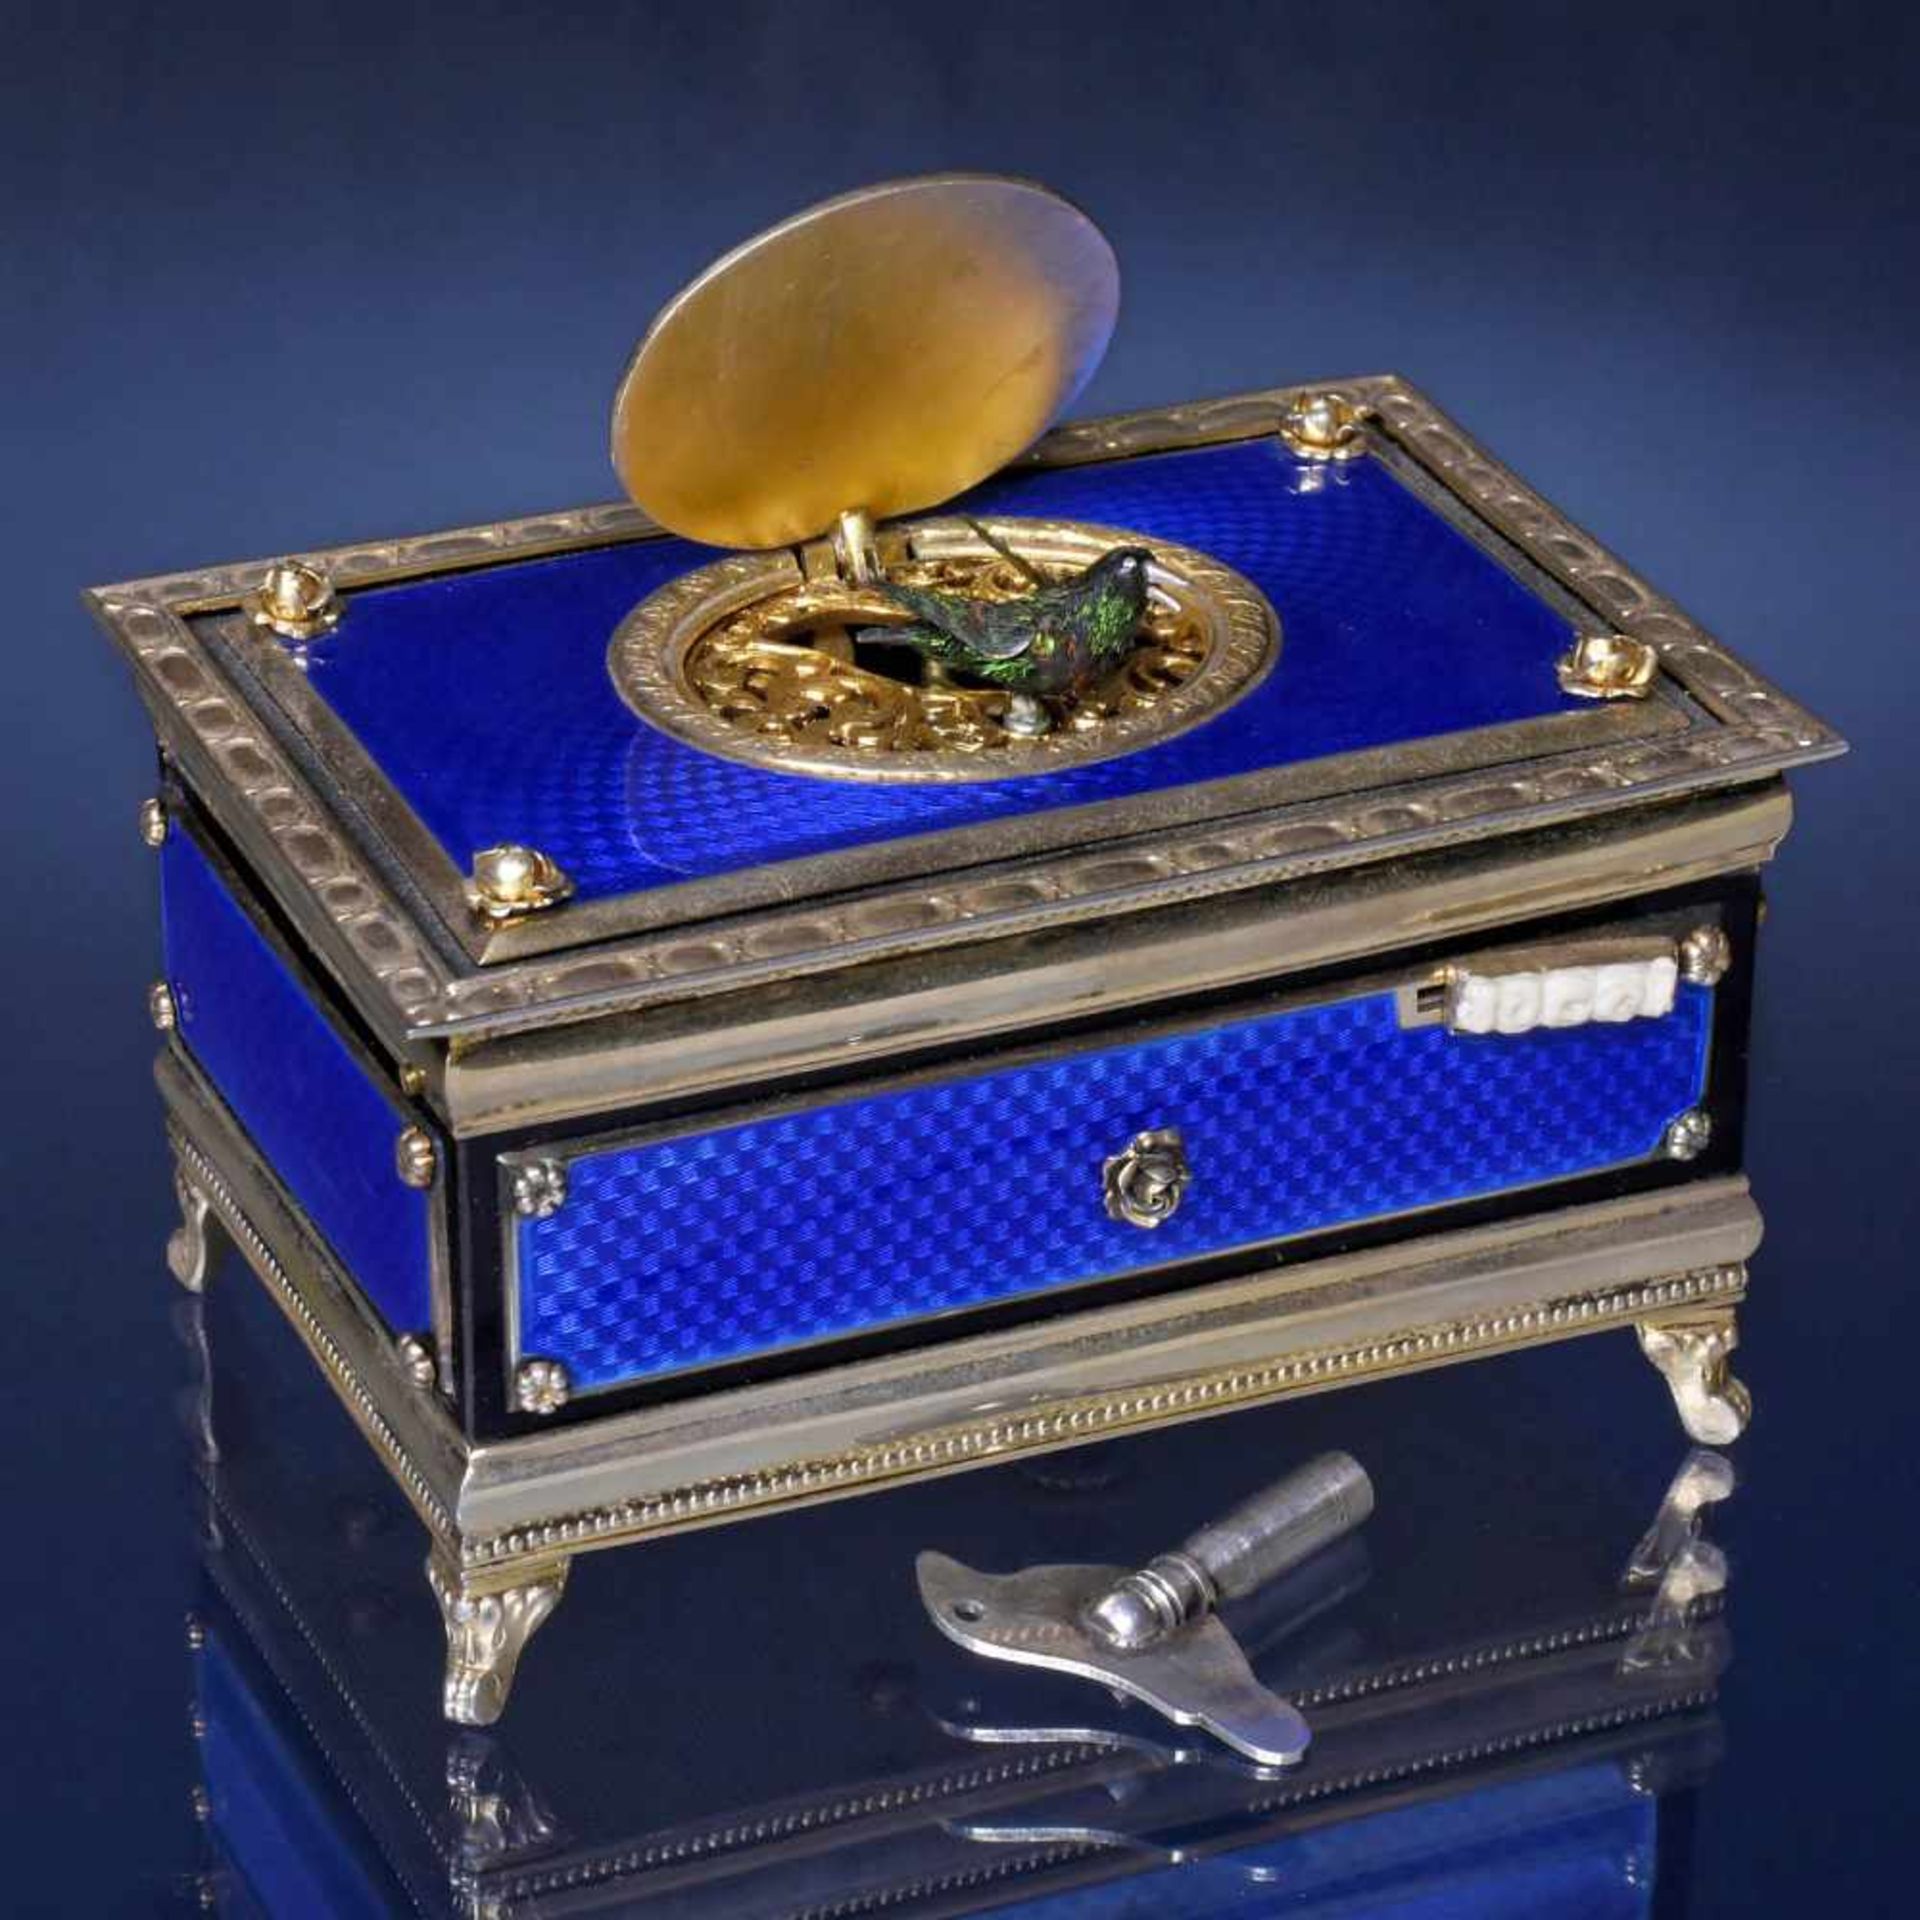 Silver and Enamel Singing Bird Box Automaton, c. 1930Probably E. Flajoulot, Paris. With going-barrel